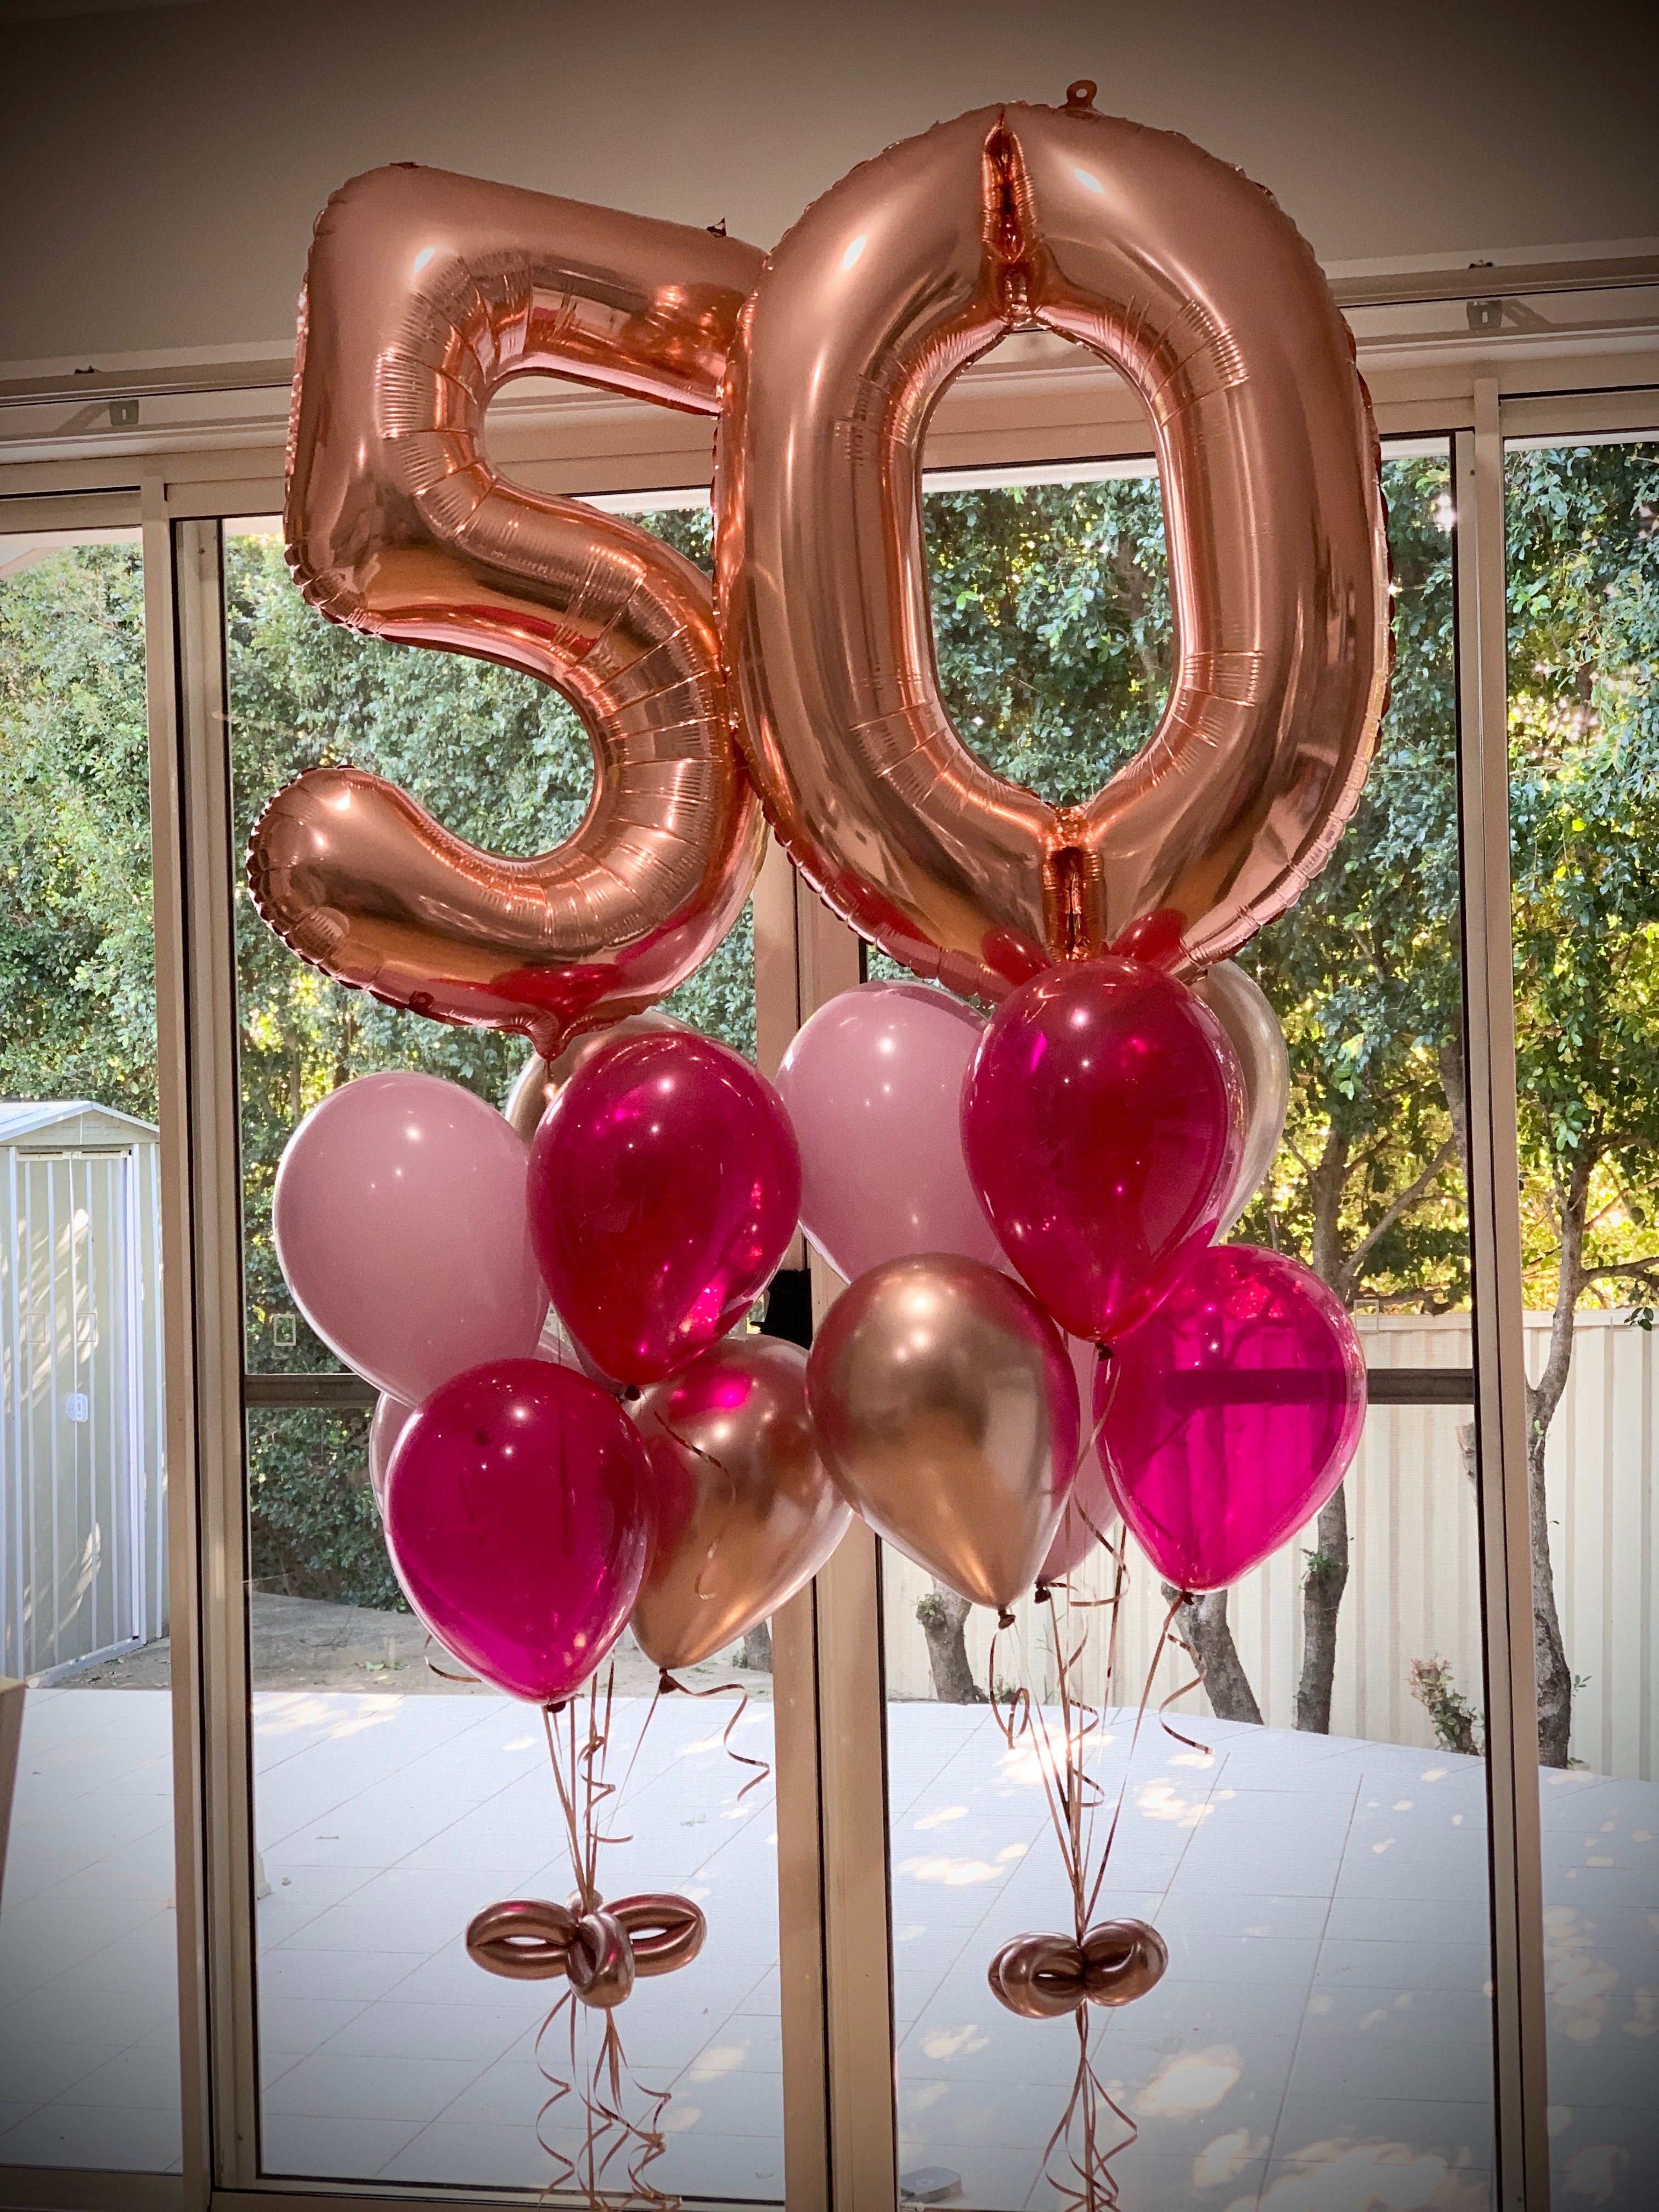 50th Birthday Balloon Bouquets Set Up